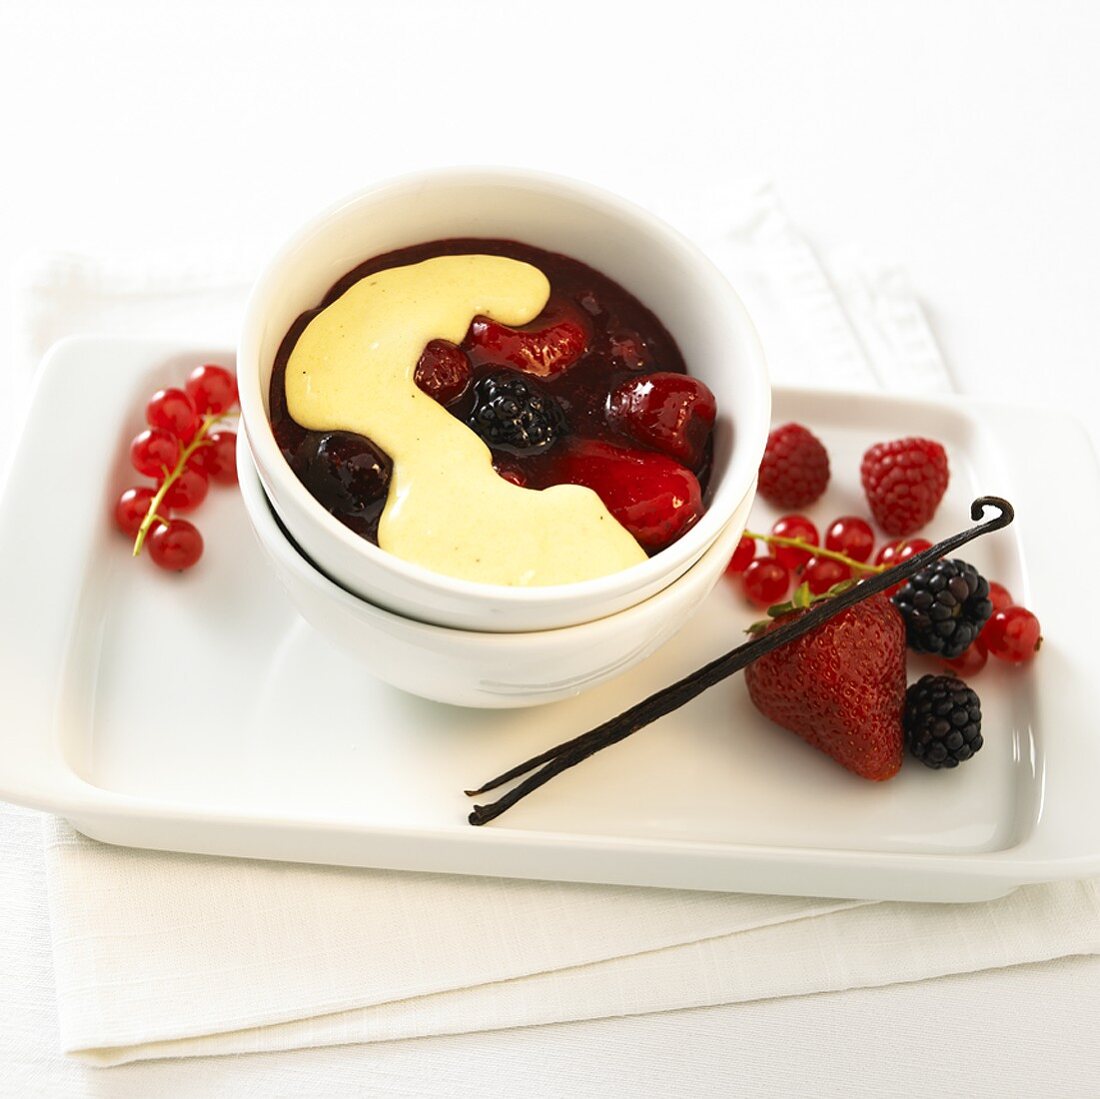 Red fruit compote with custard in a small bowl